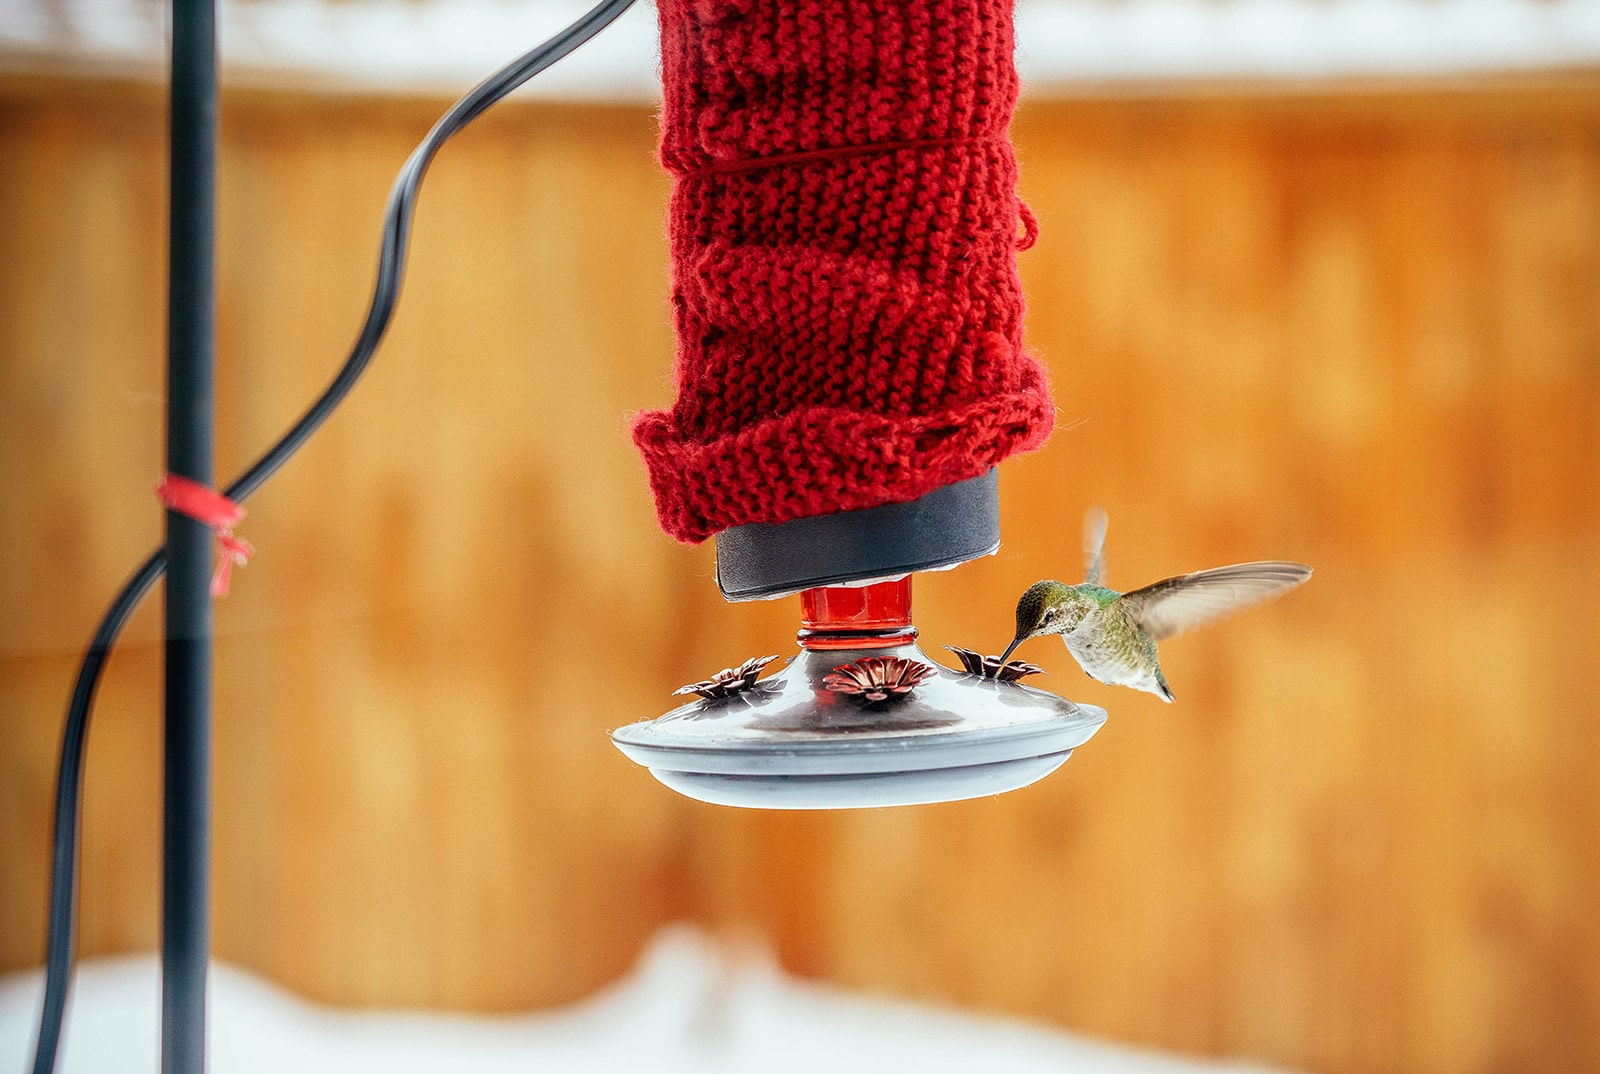 Hummingbird feeder in winter, wrapped in red knit sweater for insulation